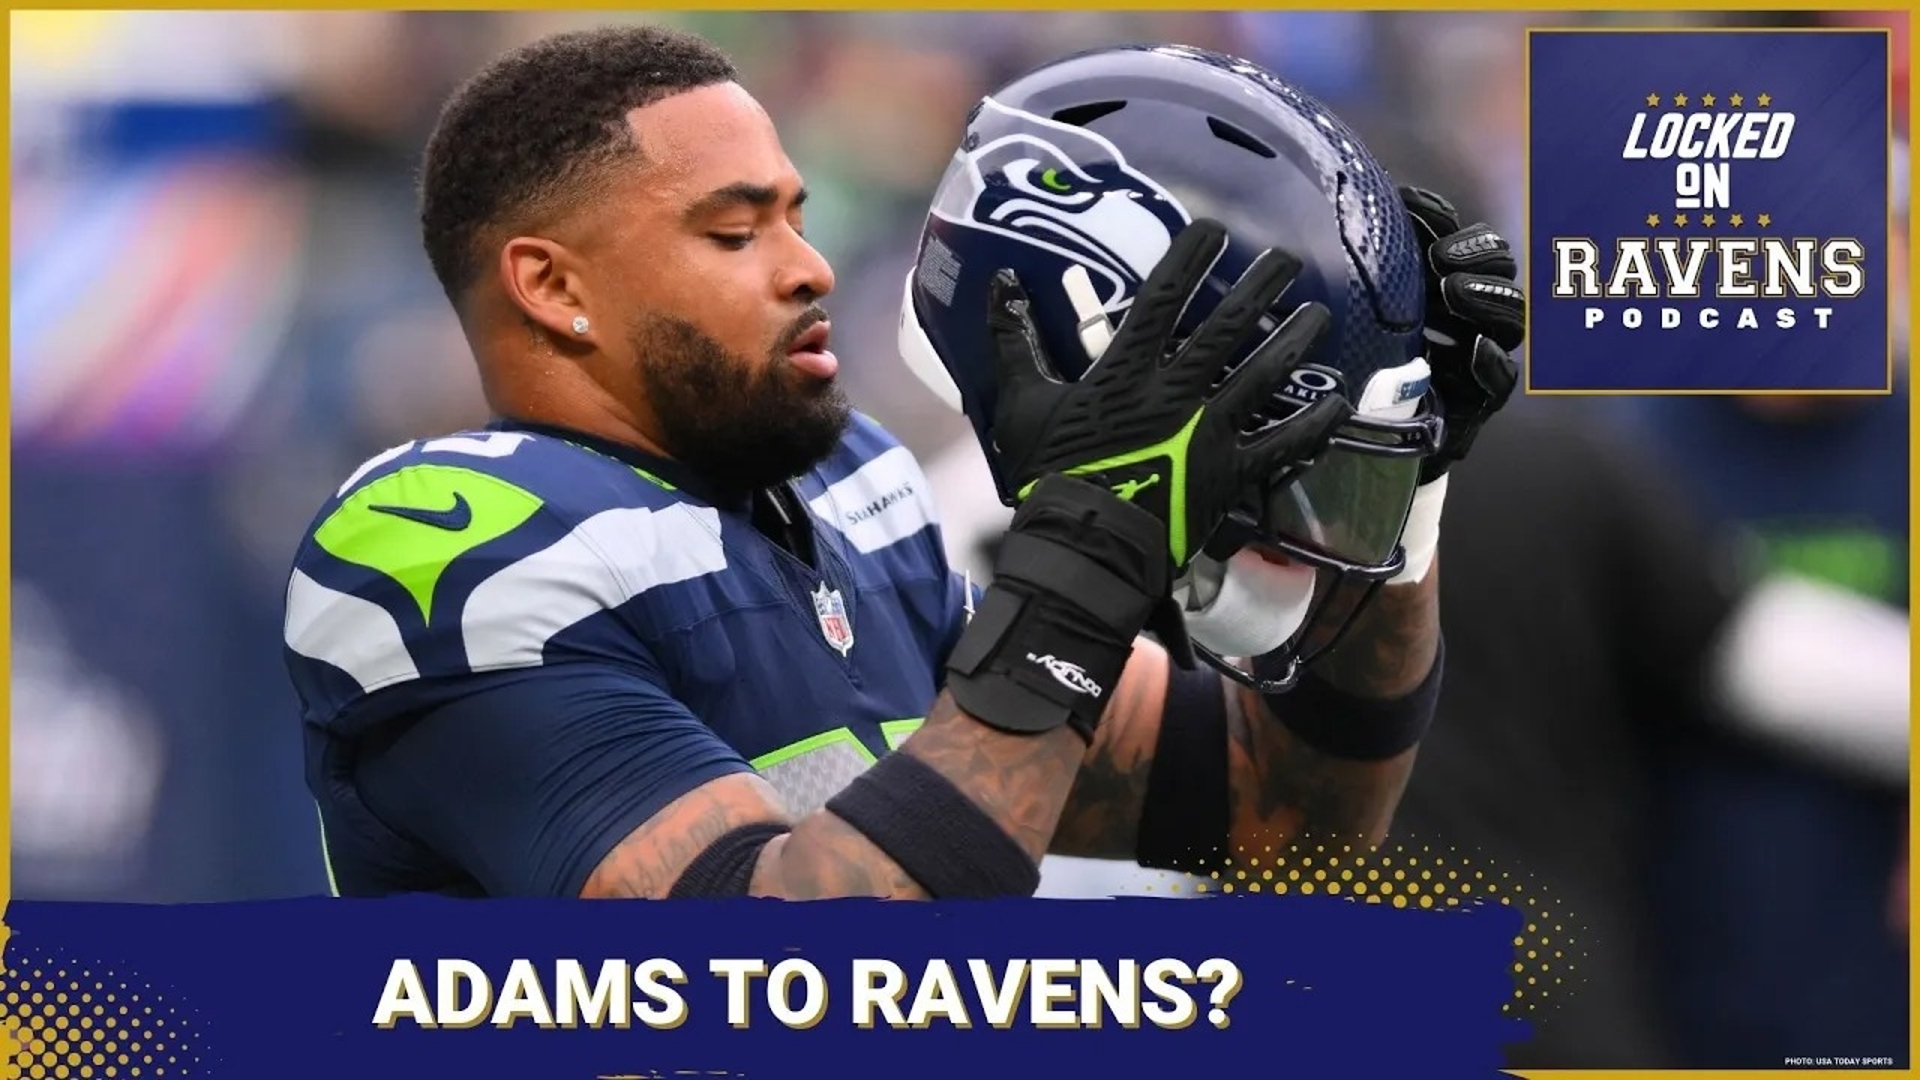 We look at if the Baltimore Ravens are making final arrangements to add Jamal Adams to their secondary after his visit with the team.